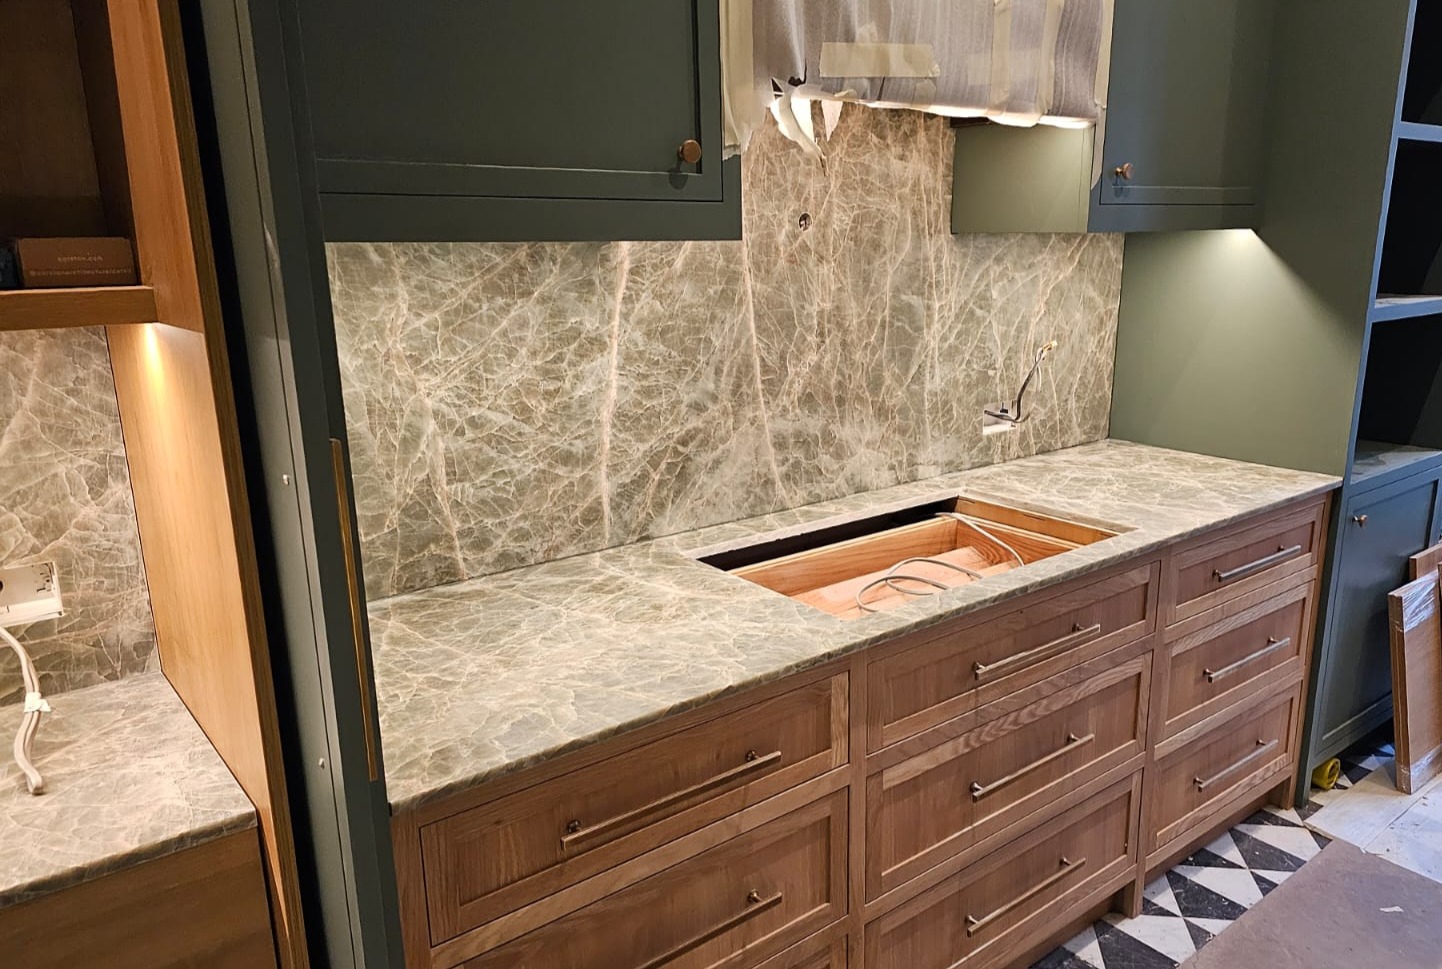 SurfaceCo Responds to Quartz Concerns with Focus on Safety and Presents Natural Stone Alternatives